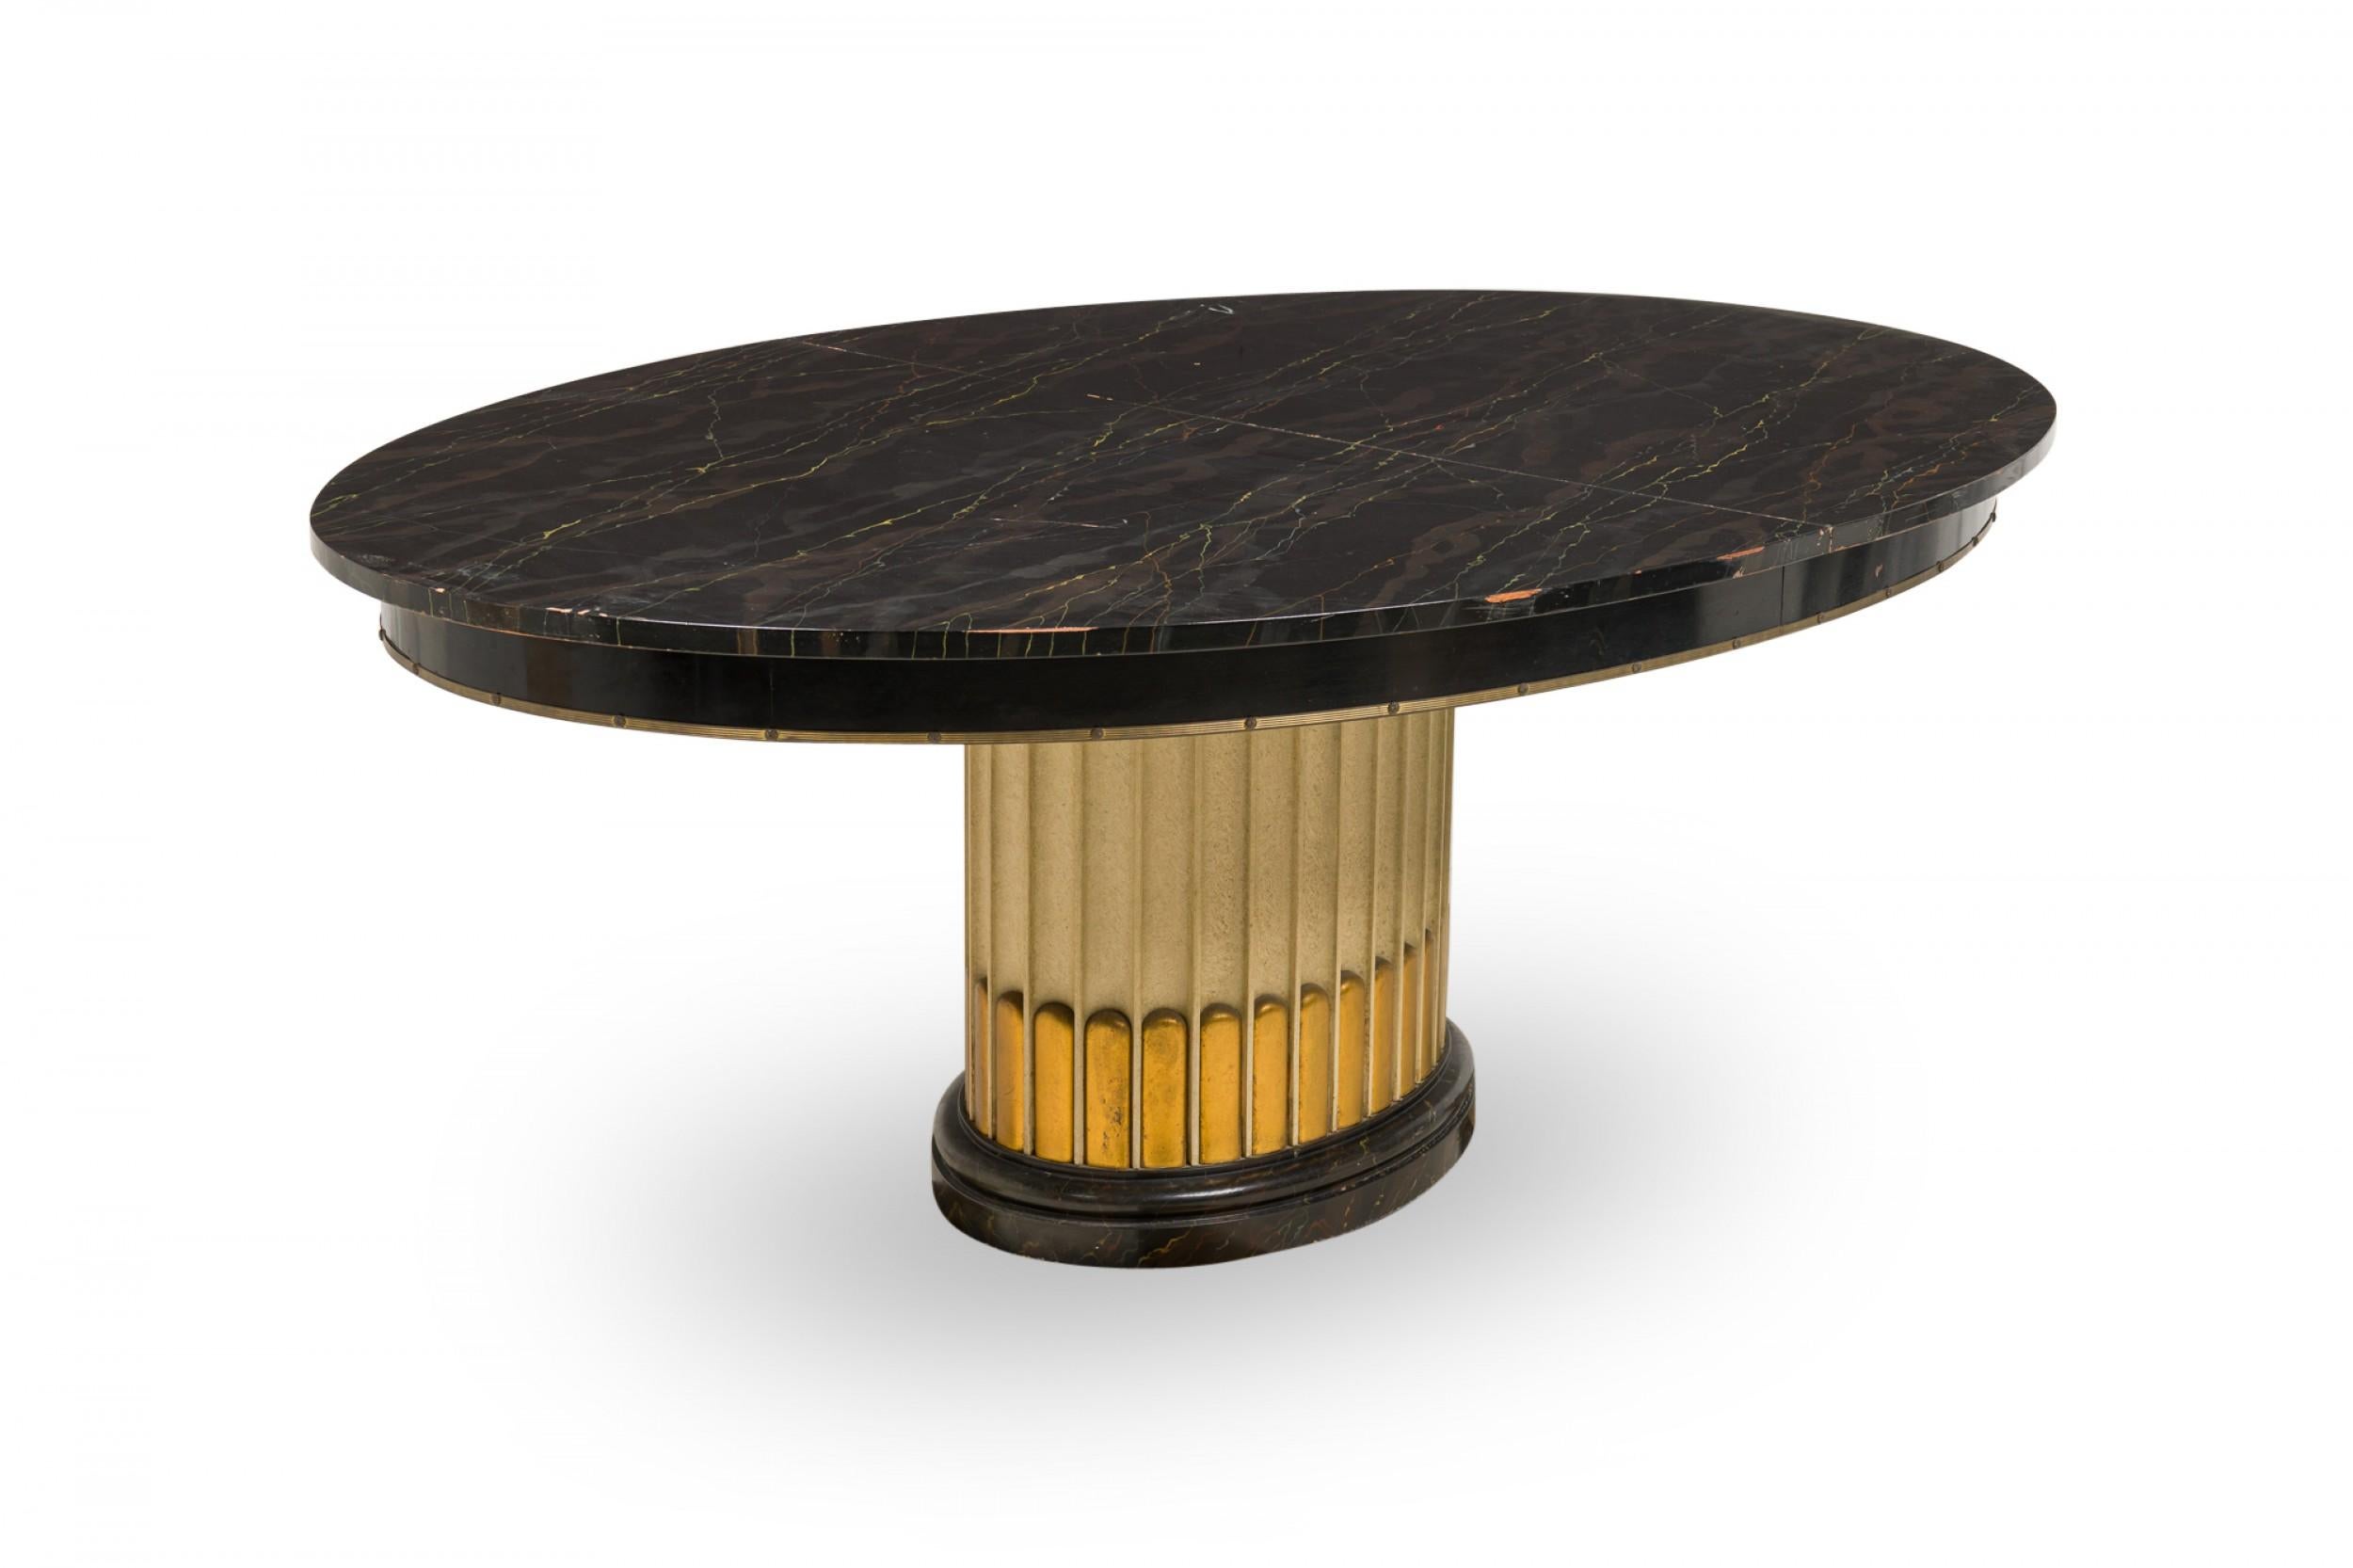 Painted Paul Frankl American Art Deco Oval Black Lacquer & Brass Extension Dining Table For Sale